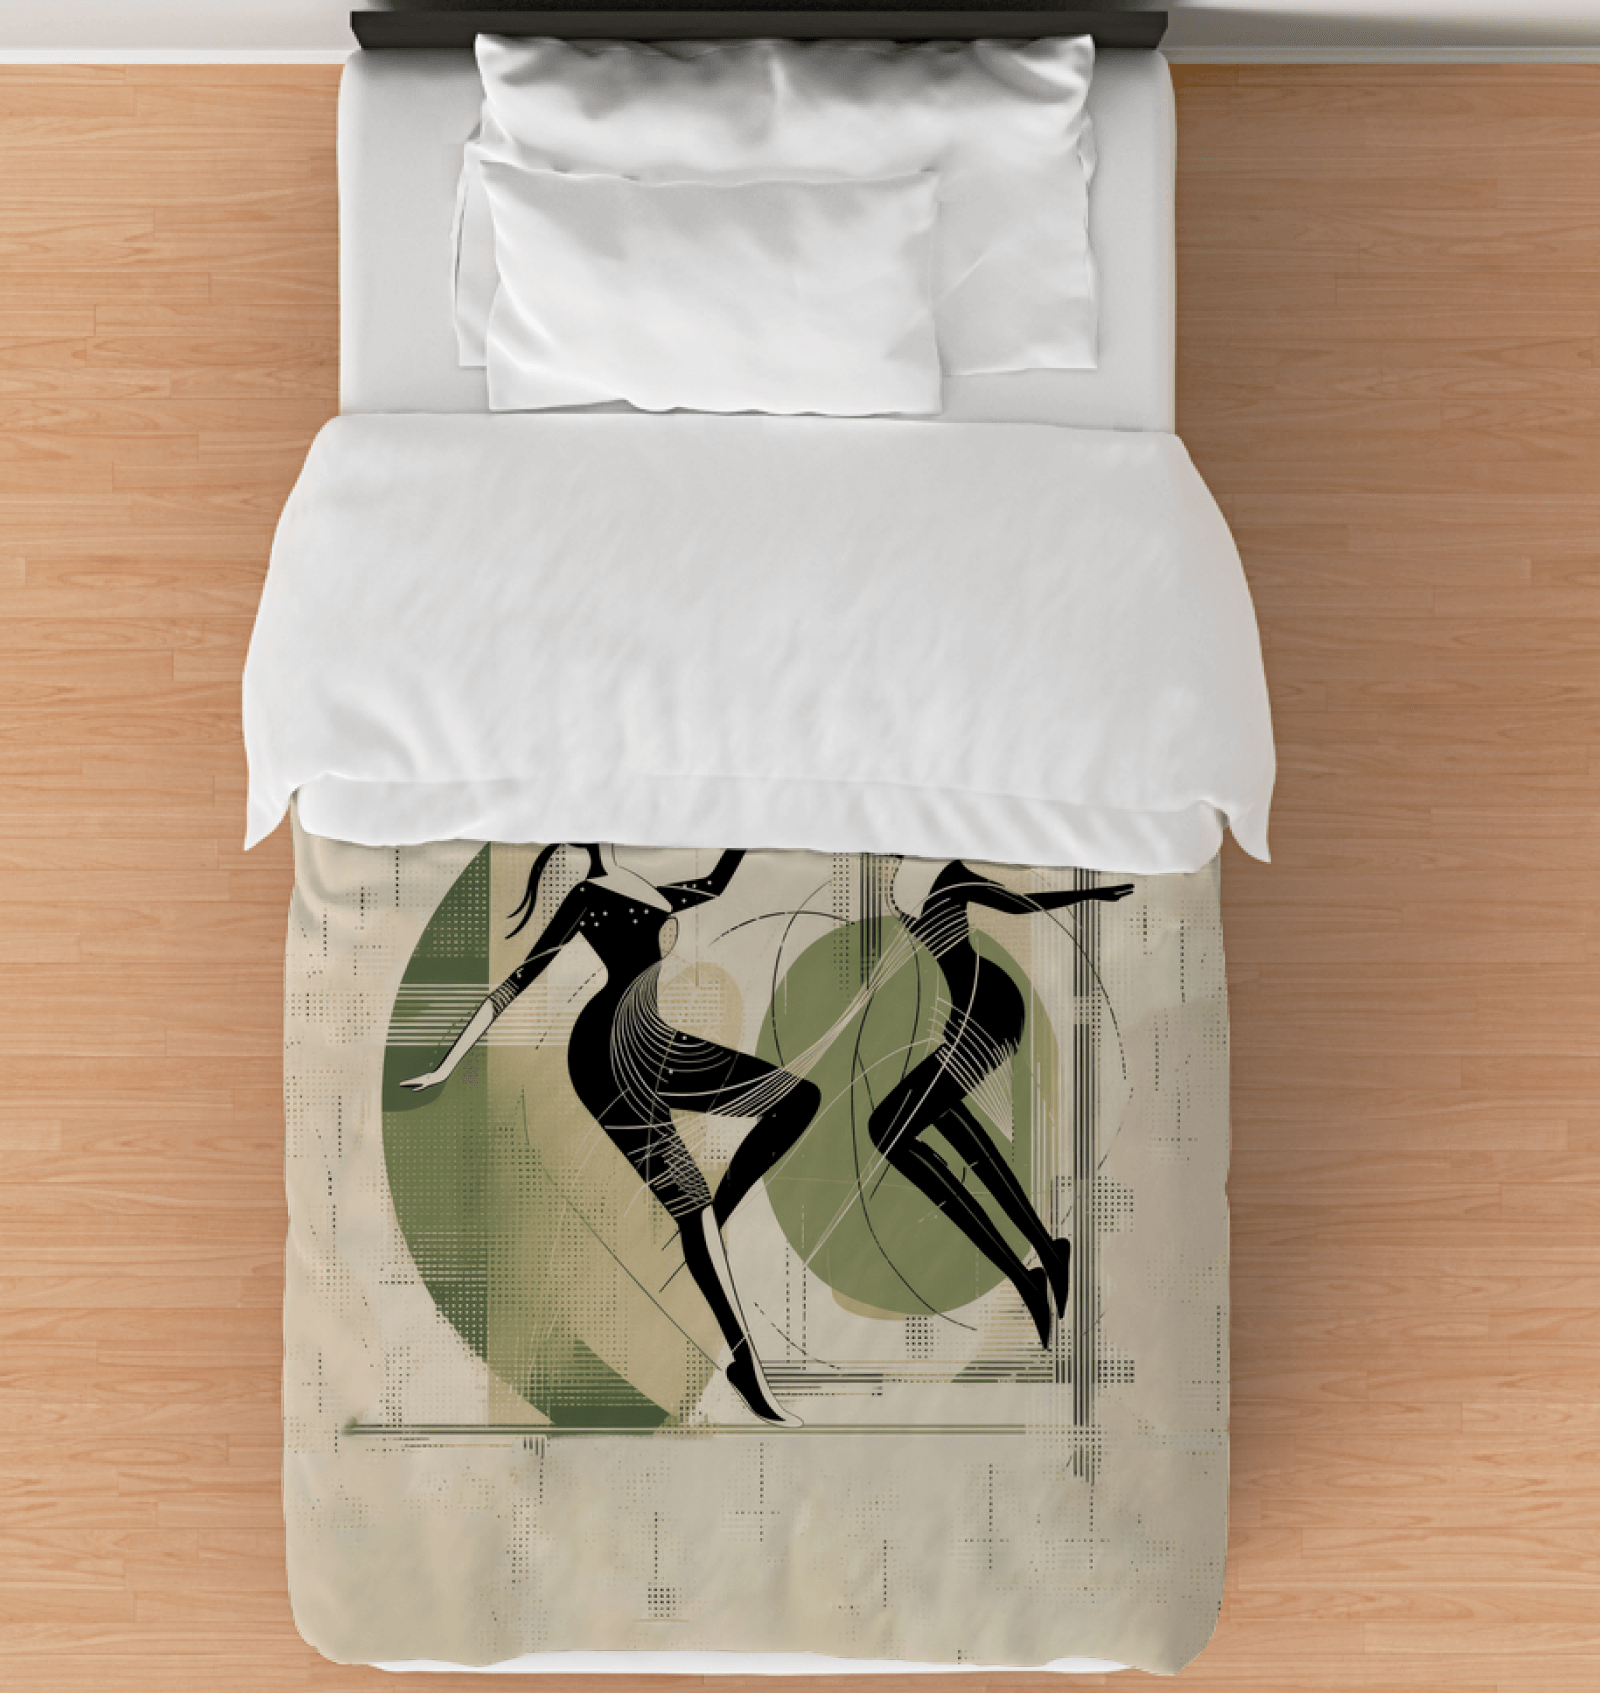 Elegant Twin-Sized Comforter with Women's Dance Attire Design for a Serene Bedroom.